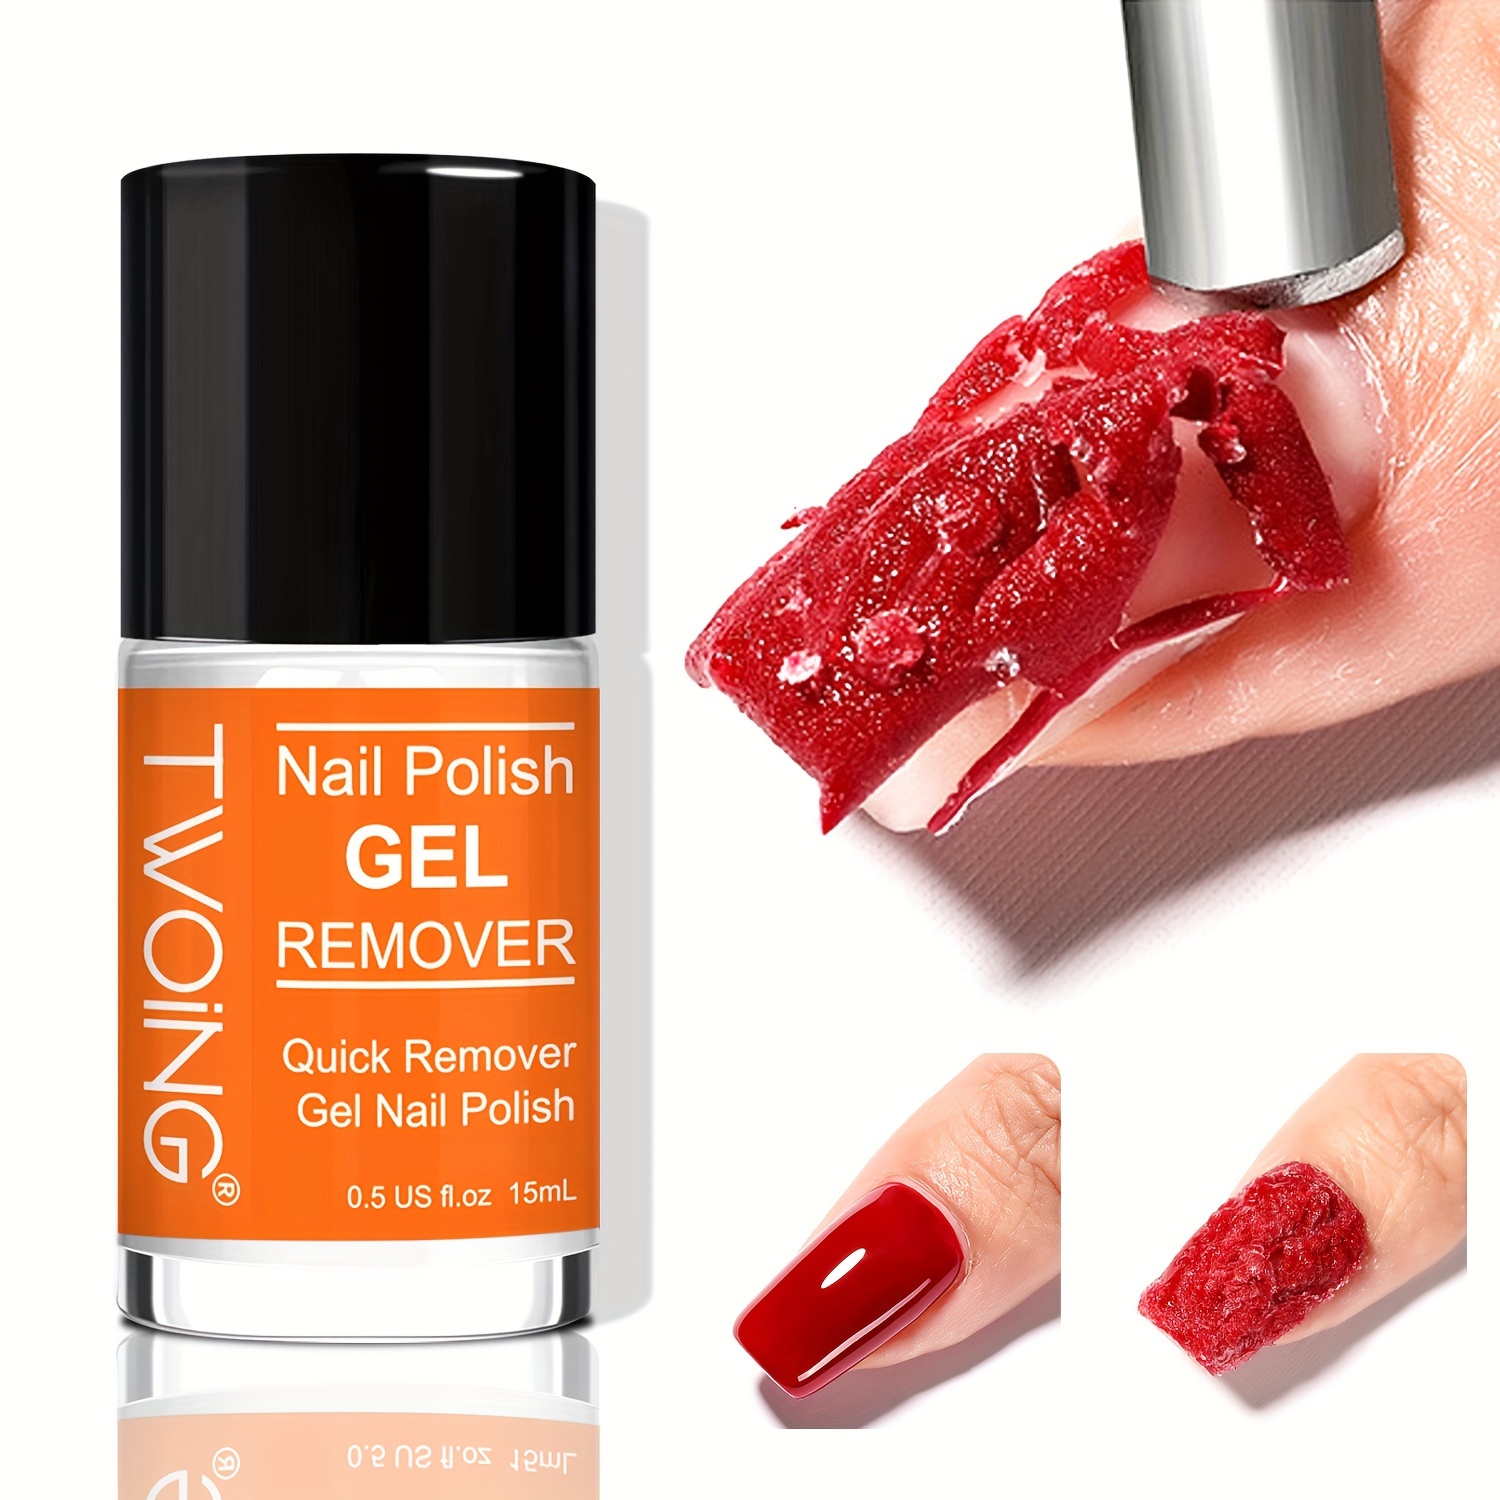 Louinstic Gel Nail Polish Remover - Quick Remove Gel Nail Polish In 3-5  Minutes, Nail Polish Remover With Cuticle Care Oil For Nail Repair  Removedor - Imported Products from USA - iBhejo